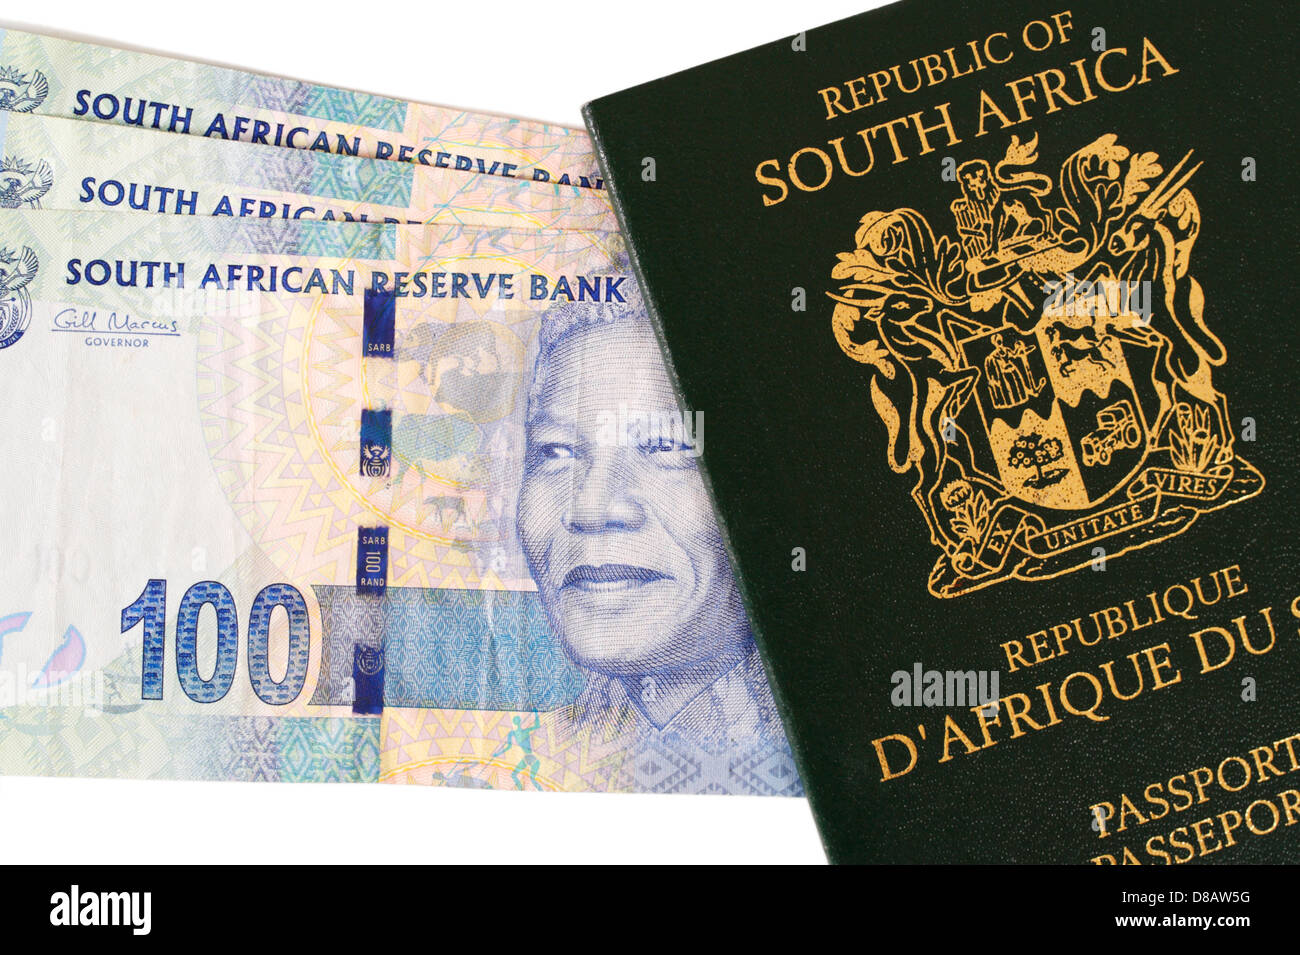 A passport for the Republic of South Africa with new South African rands currency Stock Photo